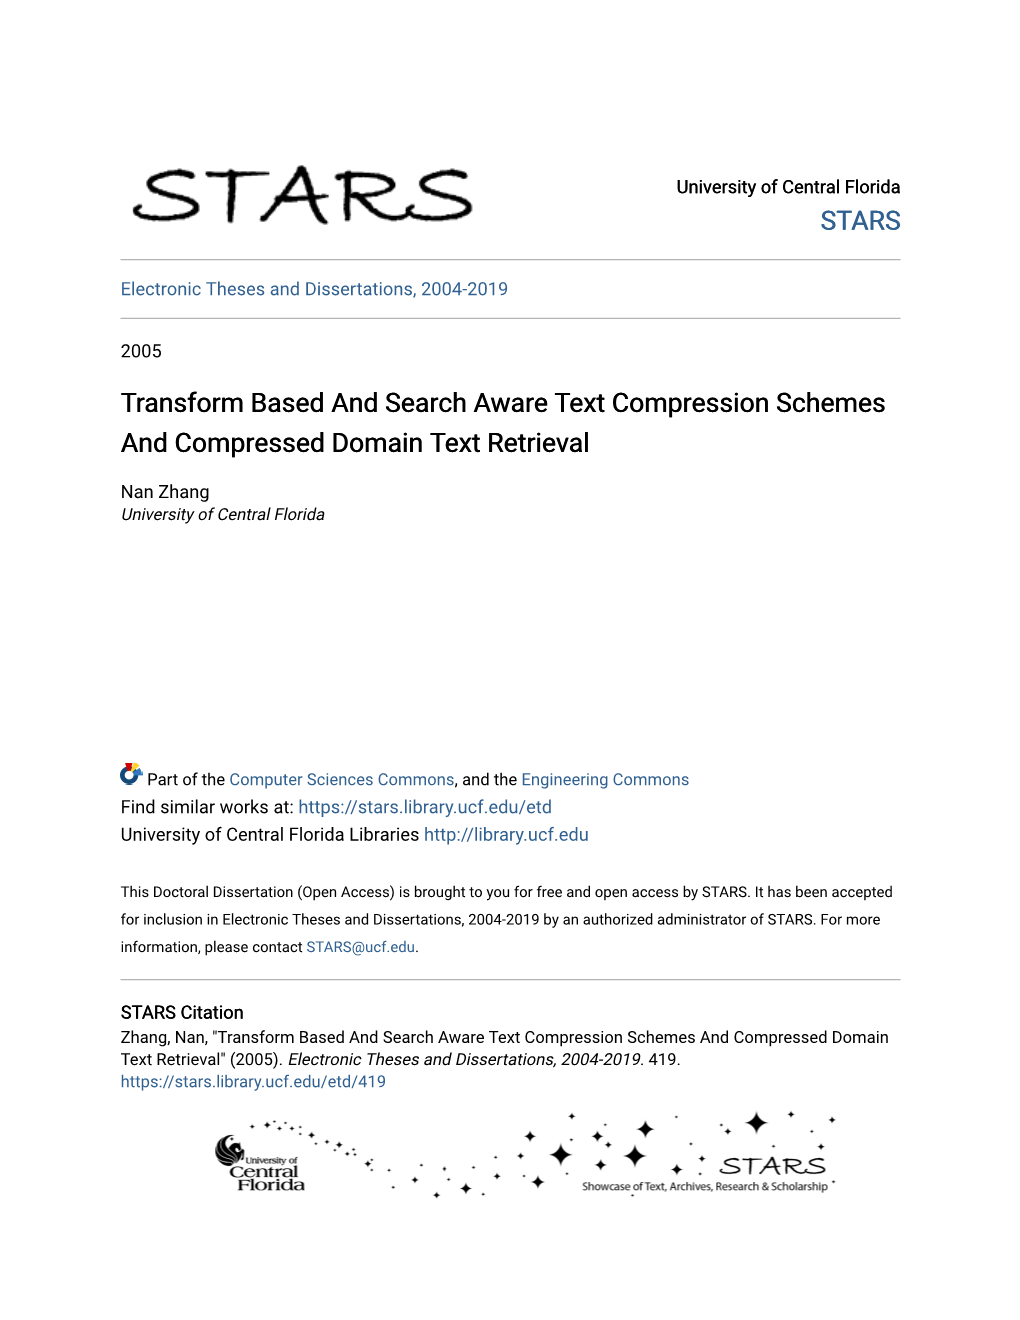 Transform Based and Search Aware Text Compression Schemes and Compressed Domain Text Retrieval